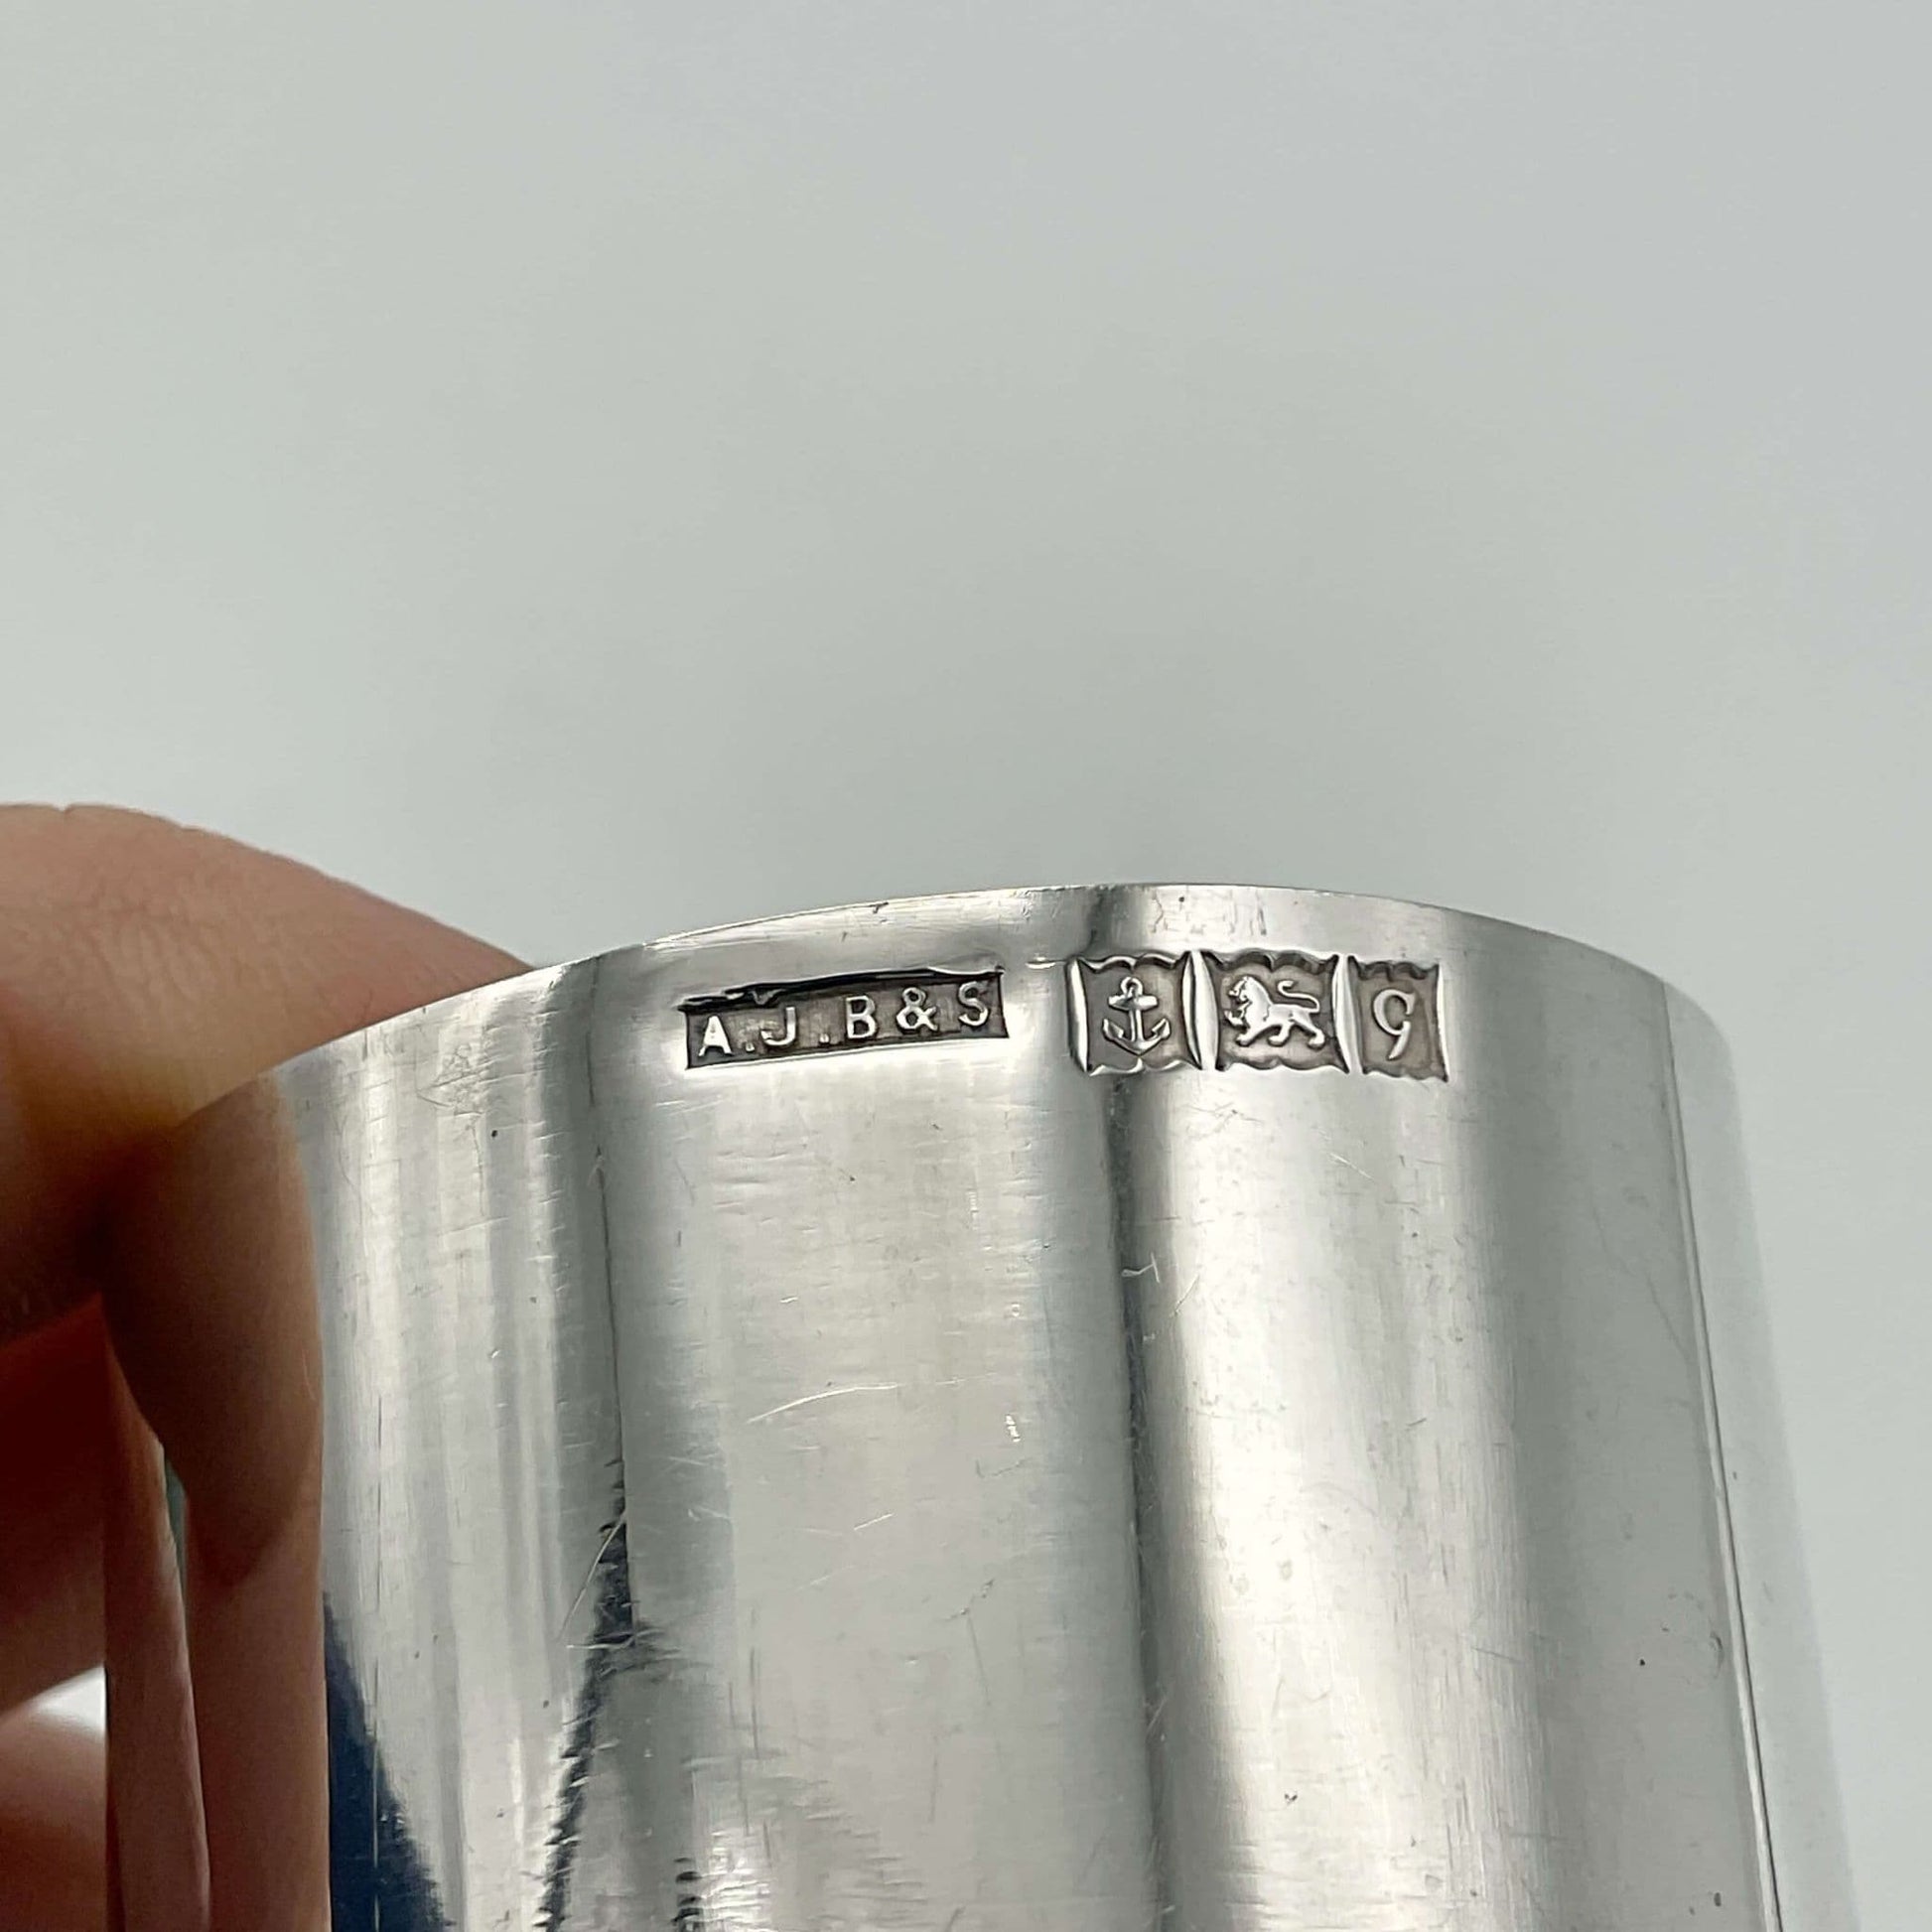 The hallmarks and makers mark on the side of the silver napkin ring